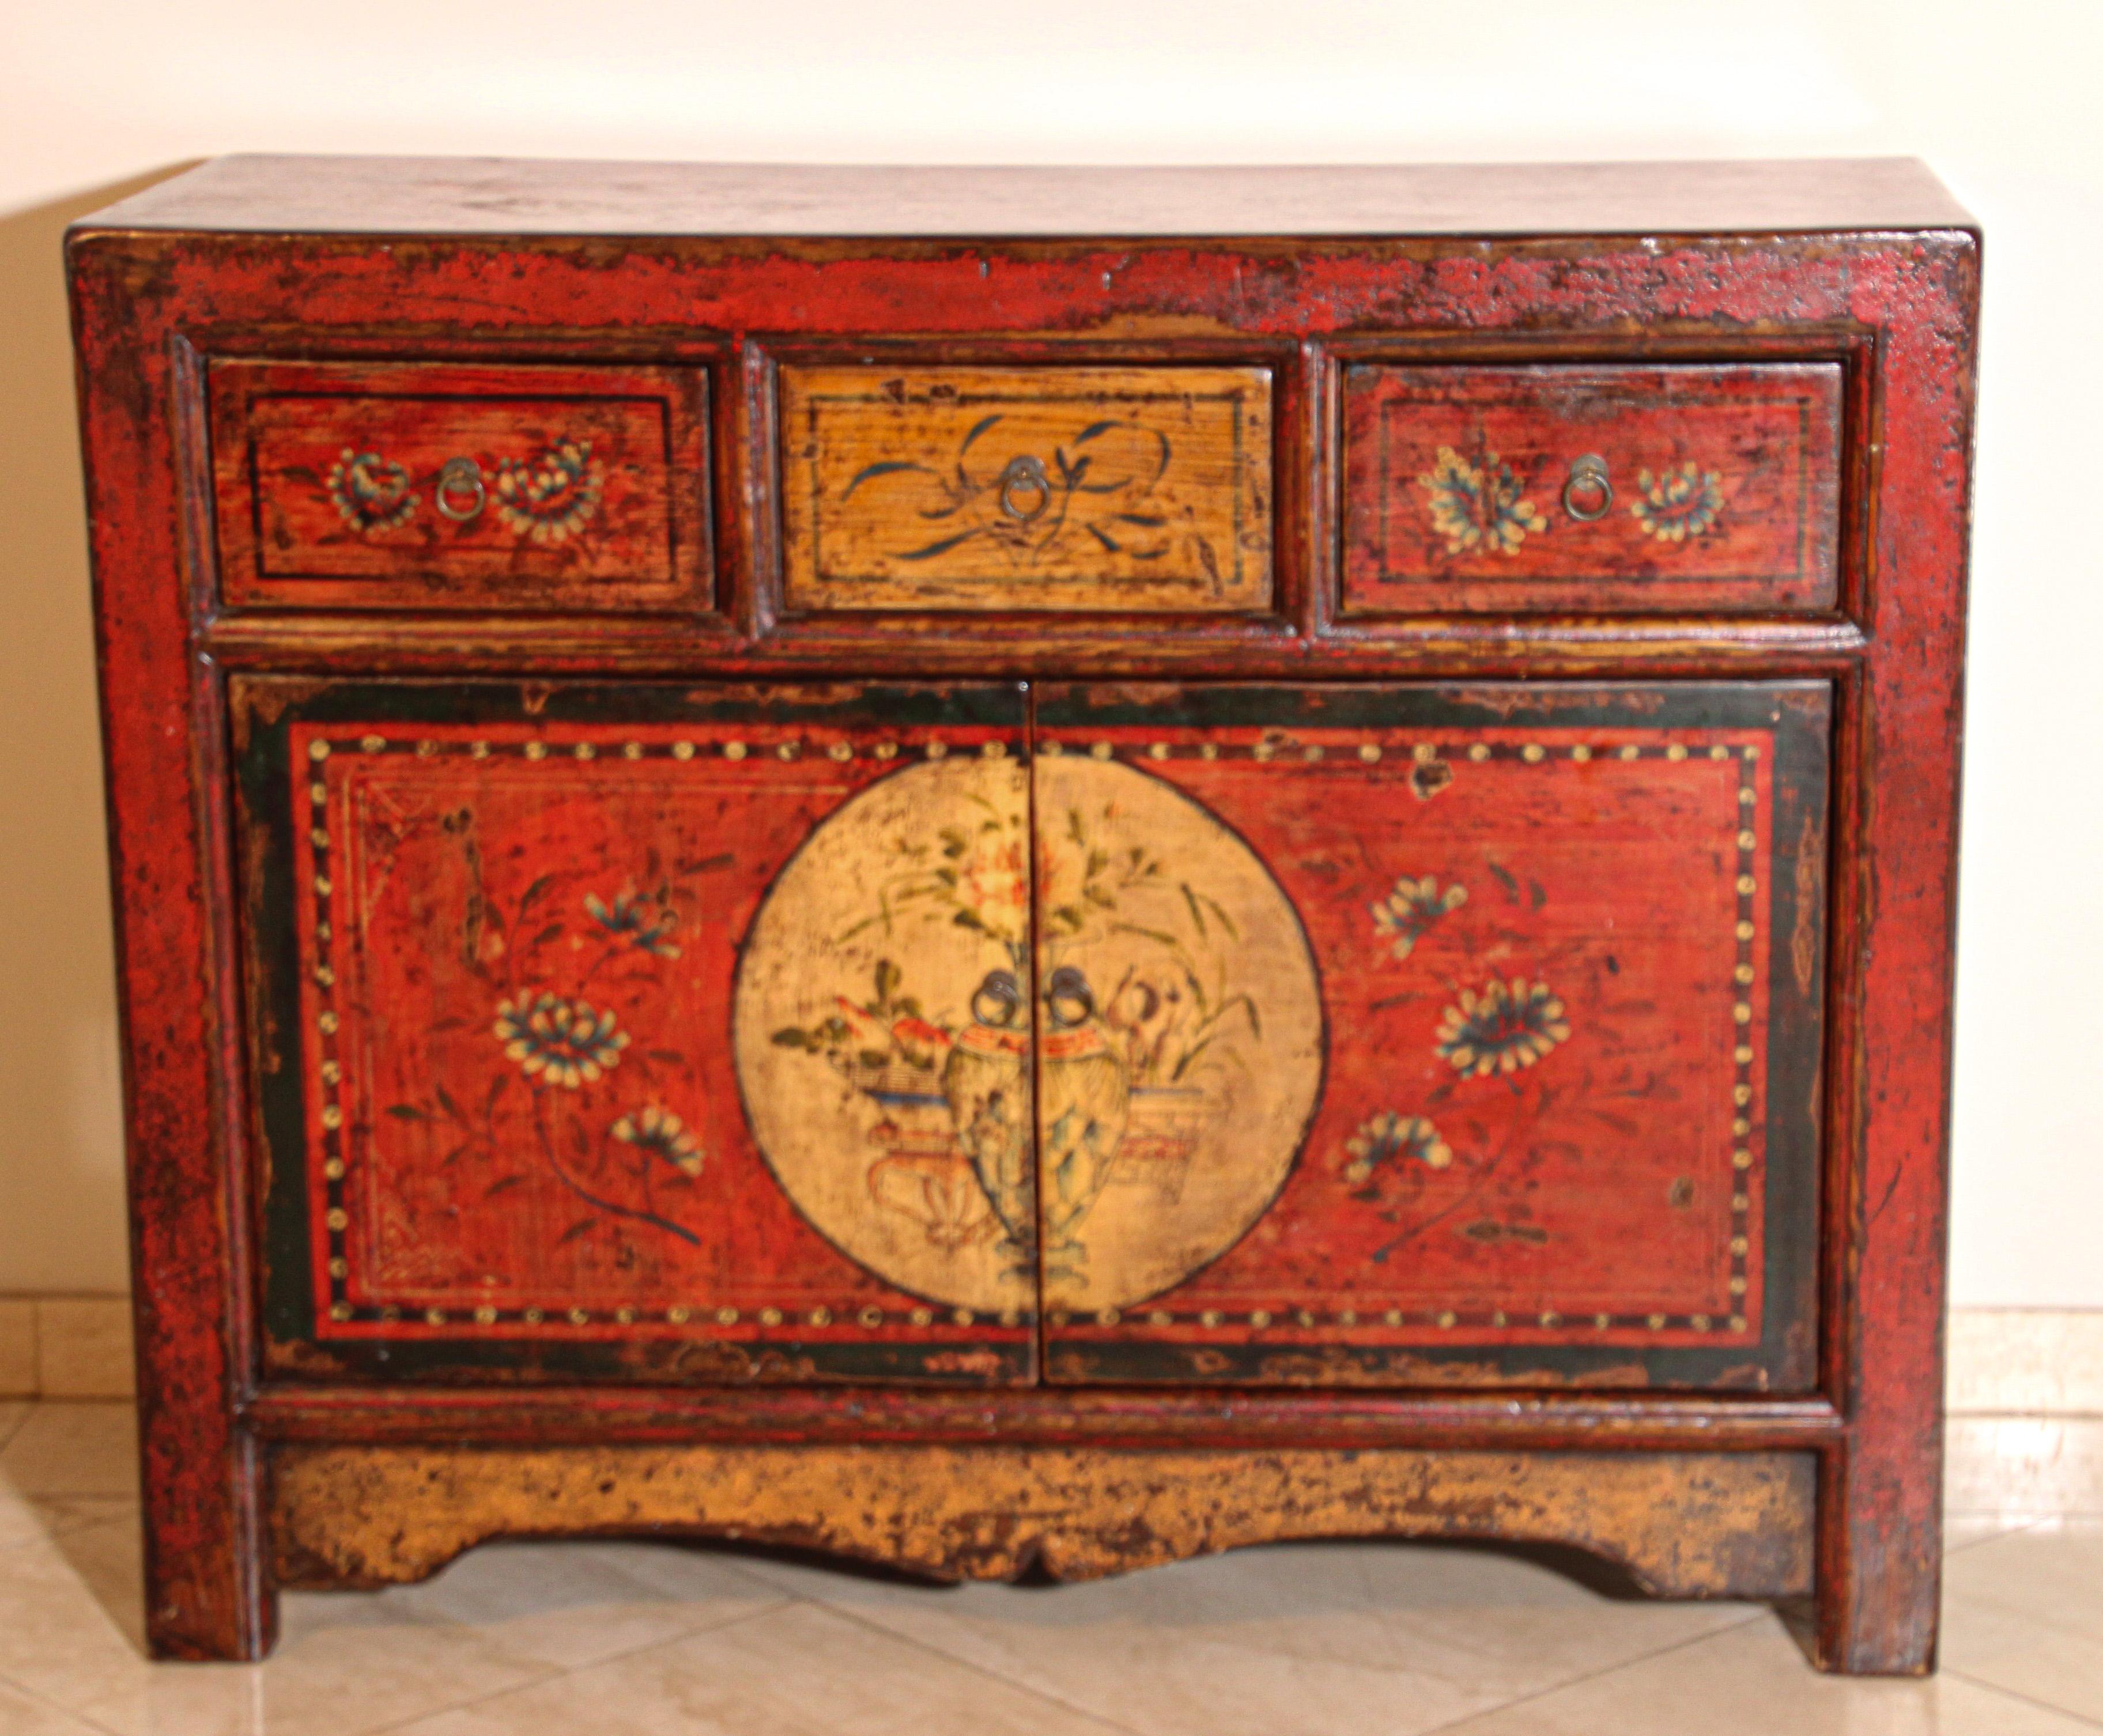 Handcrafted Tibetan dowry chest cabinet, polychrome floral designs hand painted in front.
Very elegant Bohemian style with simple modern lines.
Two doors opening, 3 drawers on top.
Great to add in a Moroccan, Bohemian, Spanish Moorish room for its